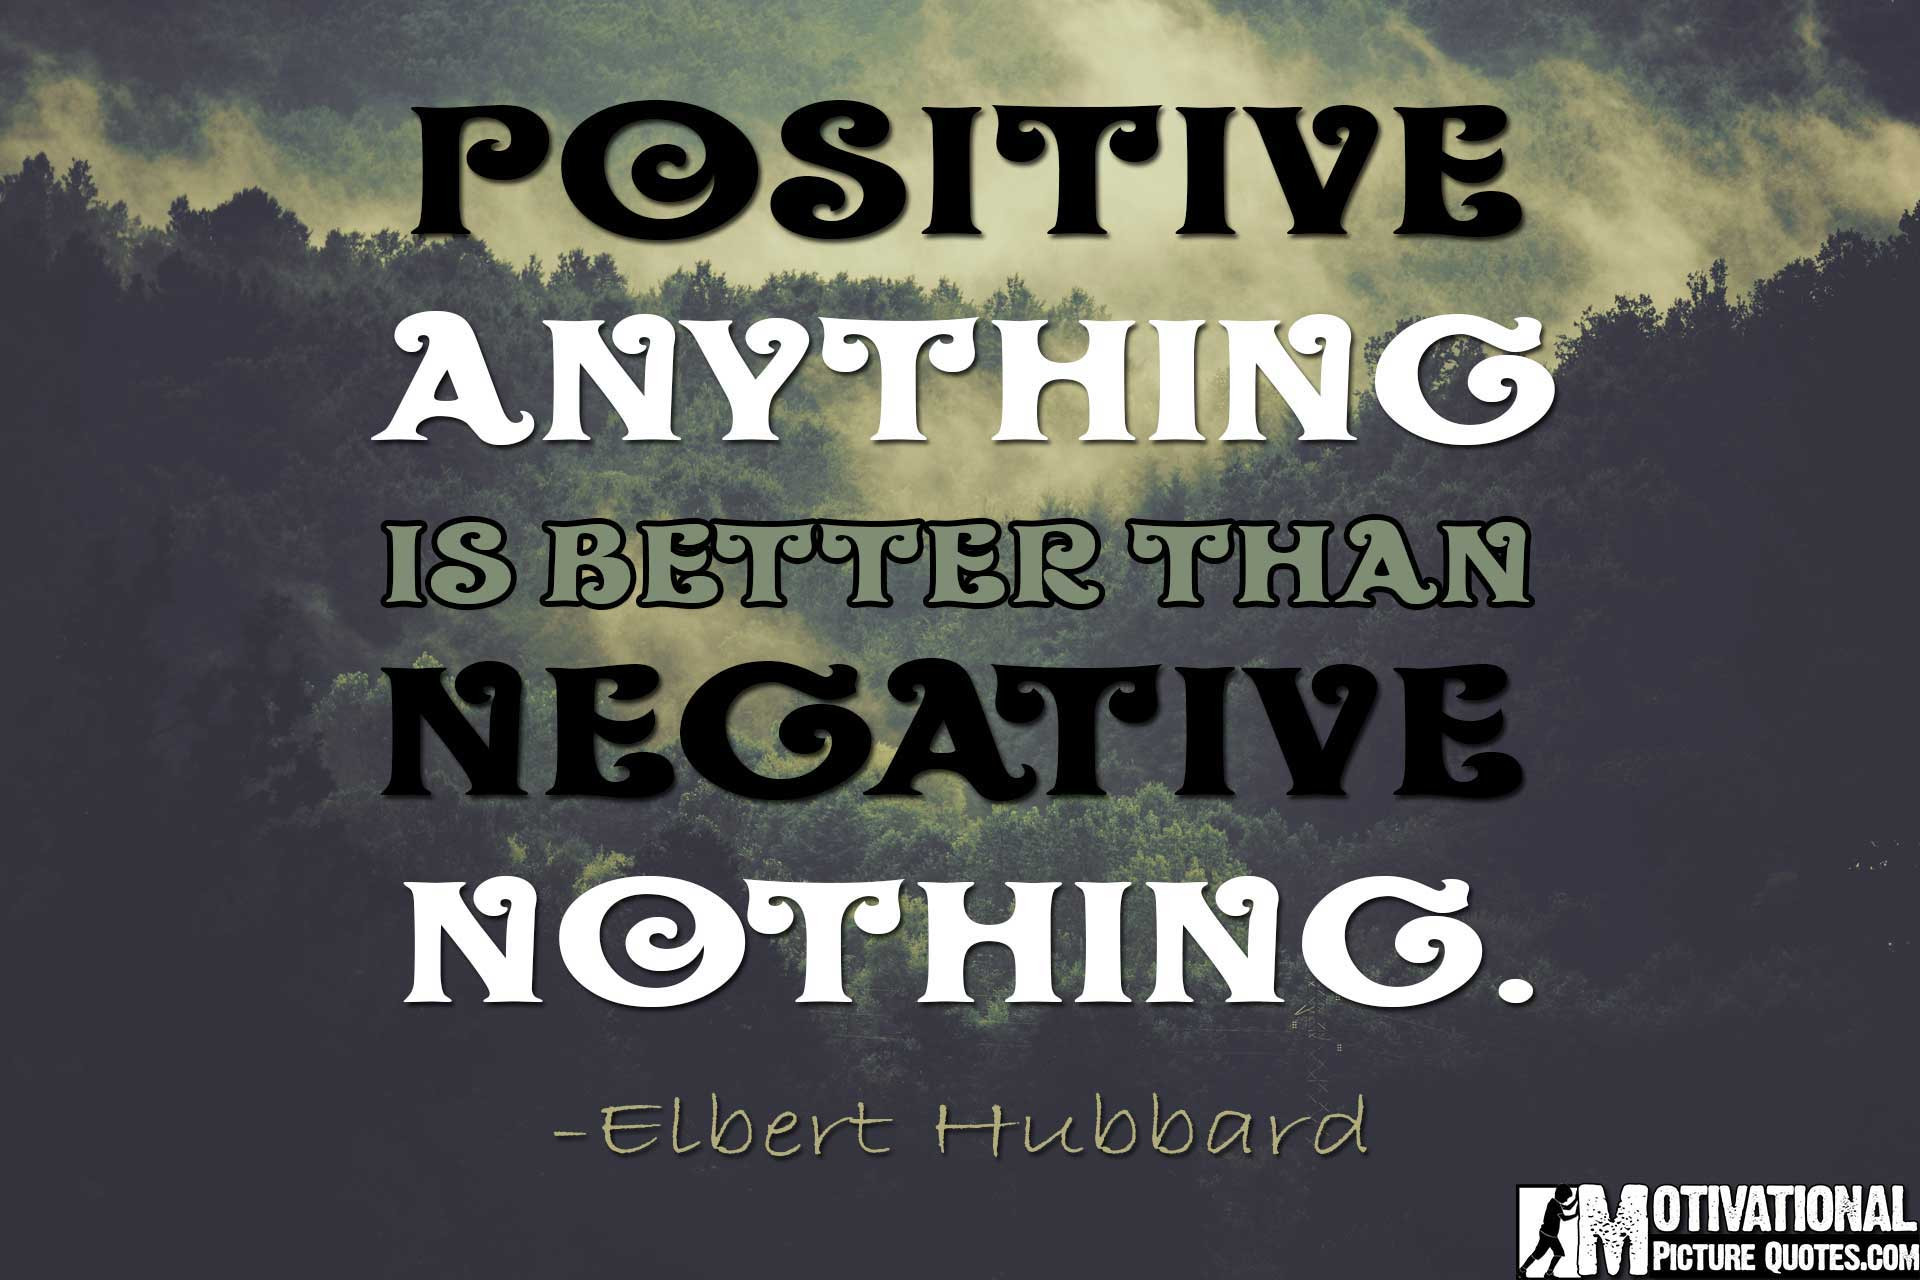 Quotes Positive Attitude
 The power of positive thinking quotes with